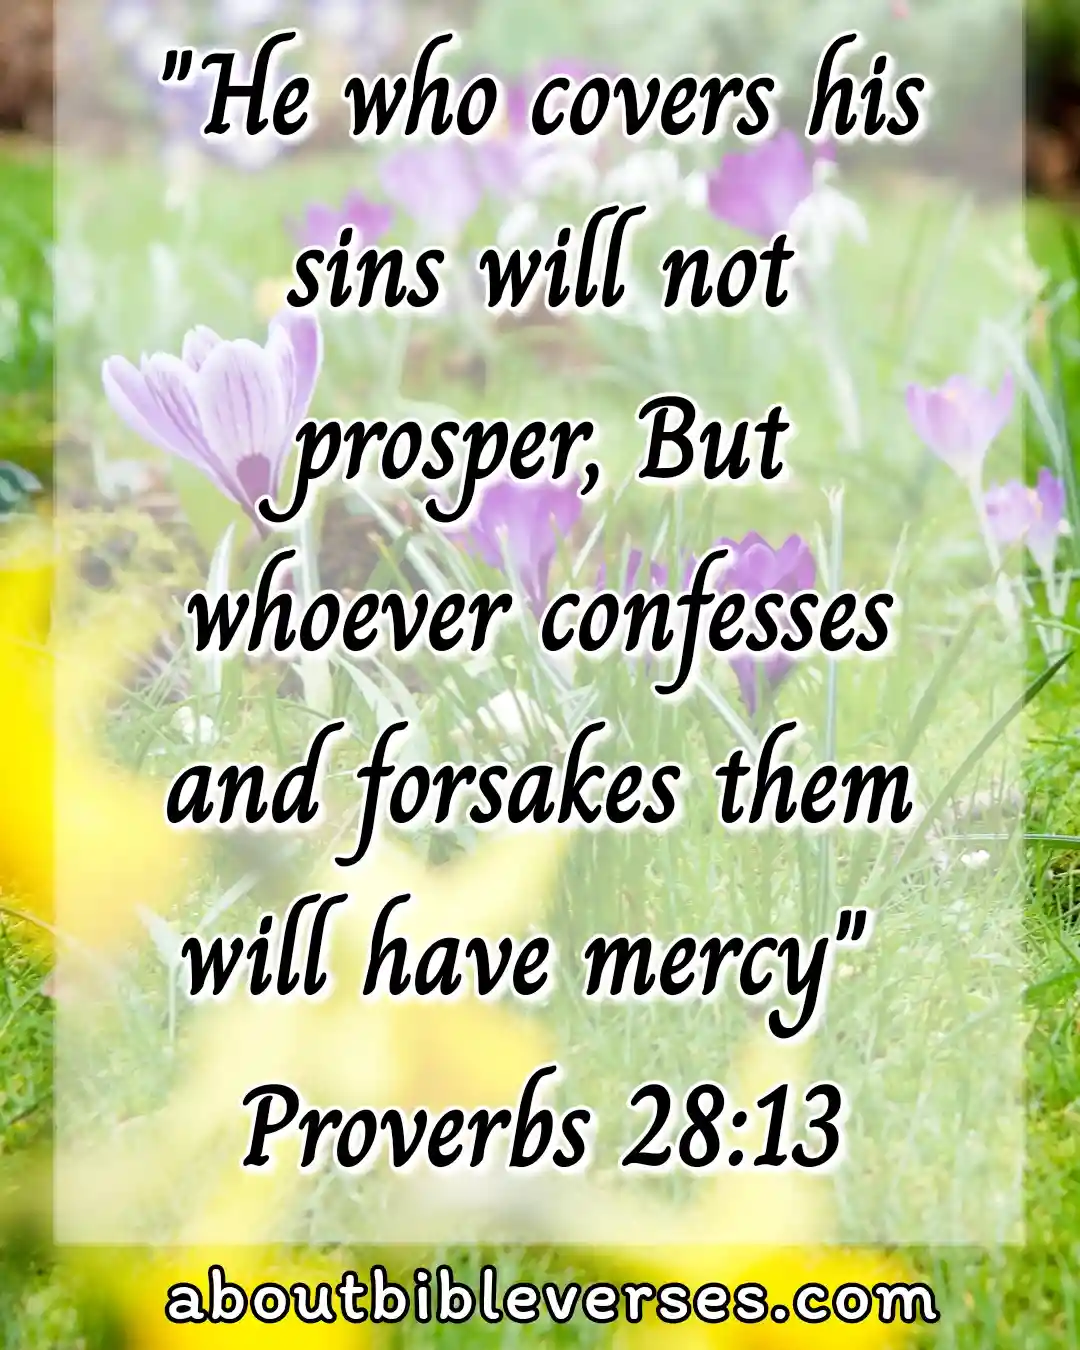 Bible Verses For Reconciliation And Forgiveness (Proverbs 28:13)